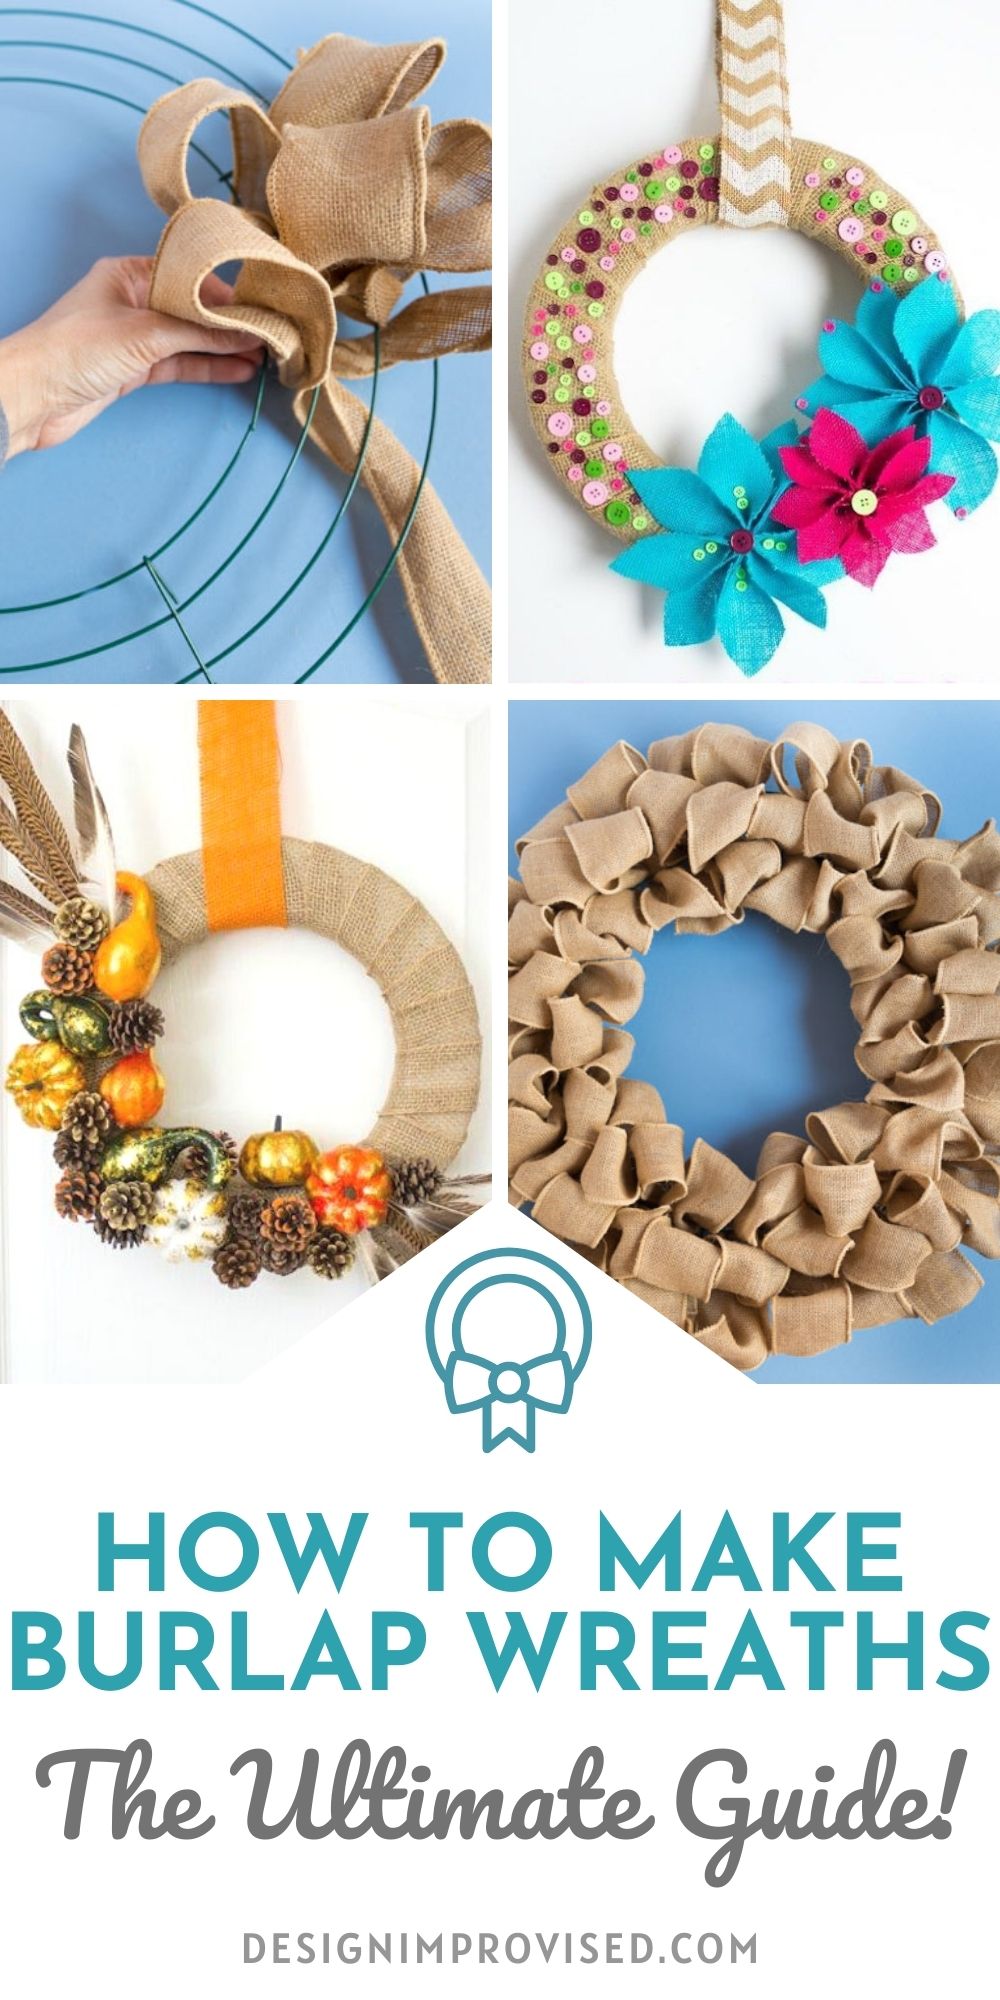 How to make burlap wreaths: A beginner's guide